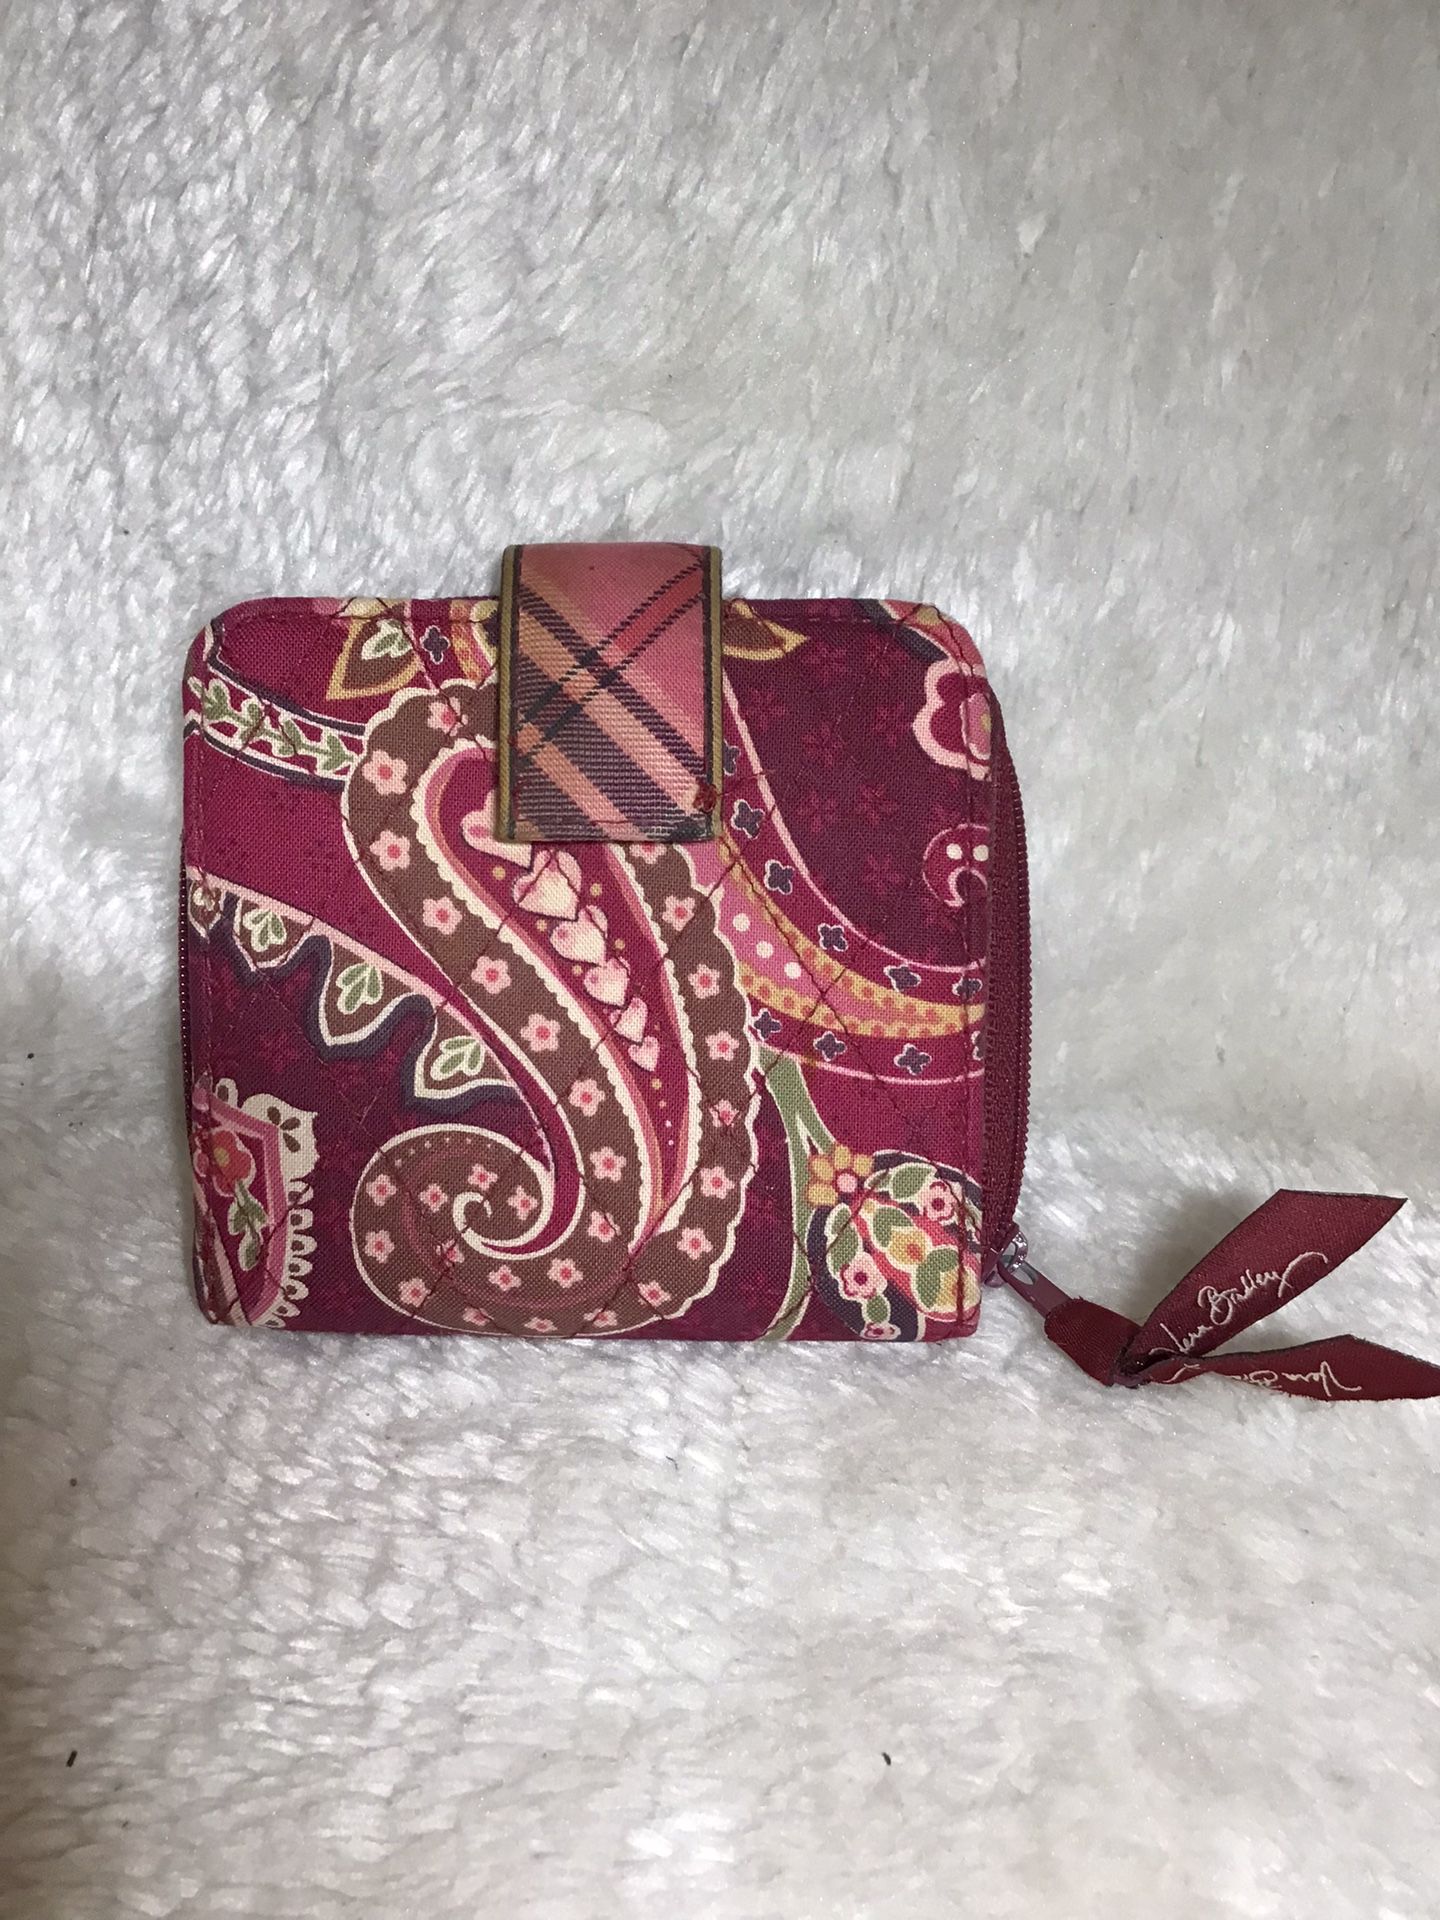 Vera Bradley Retired Piccadilly Plum Mini Zip Walley Discontinued Pattern 